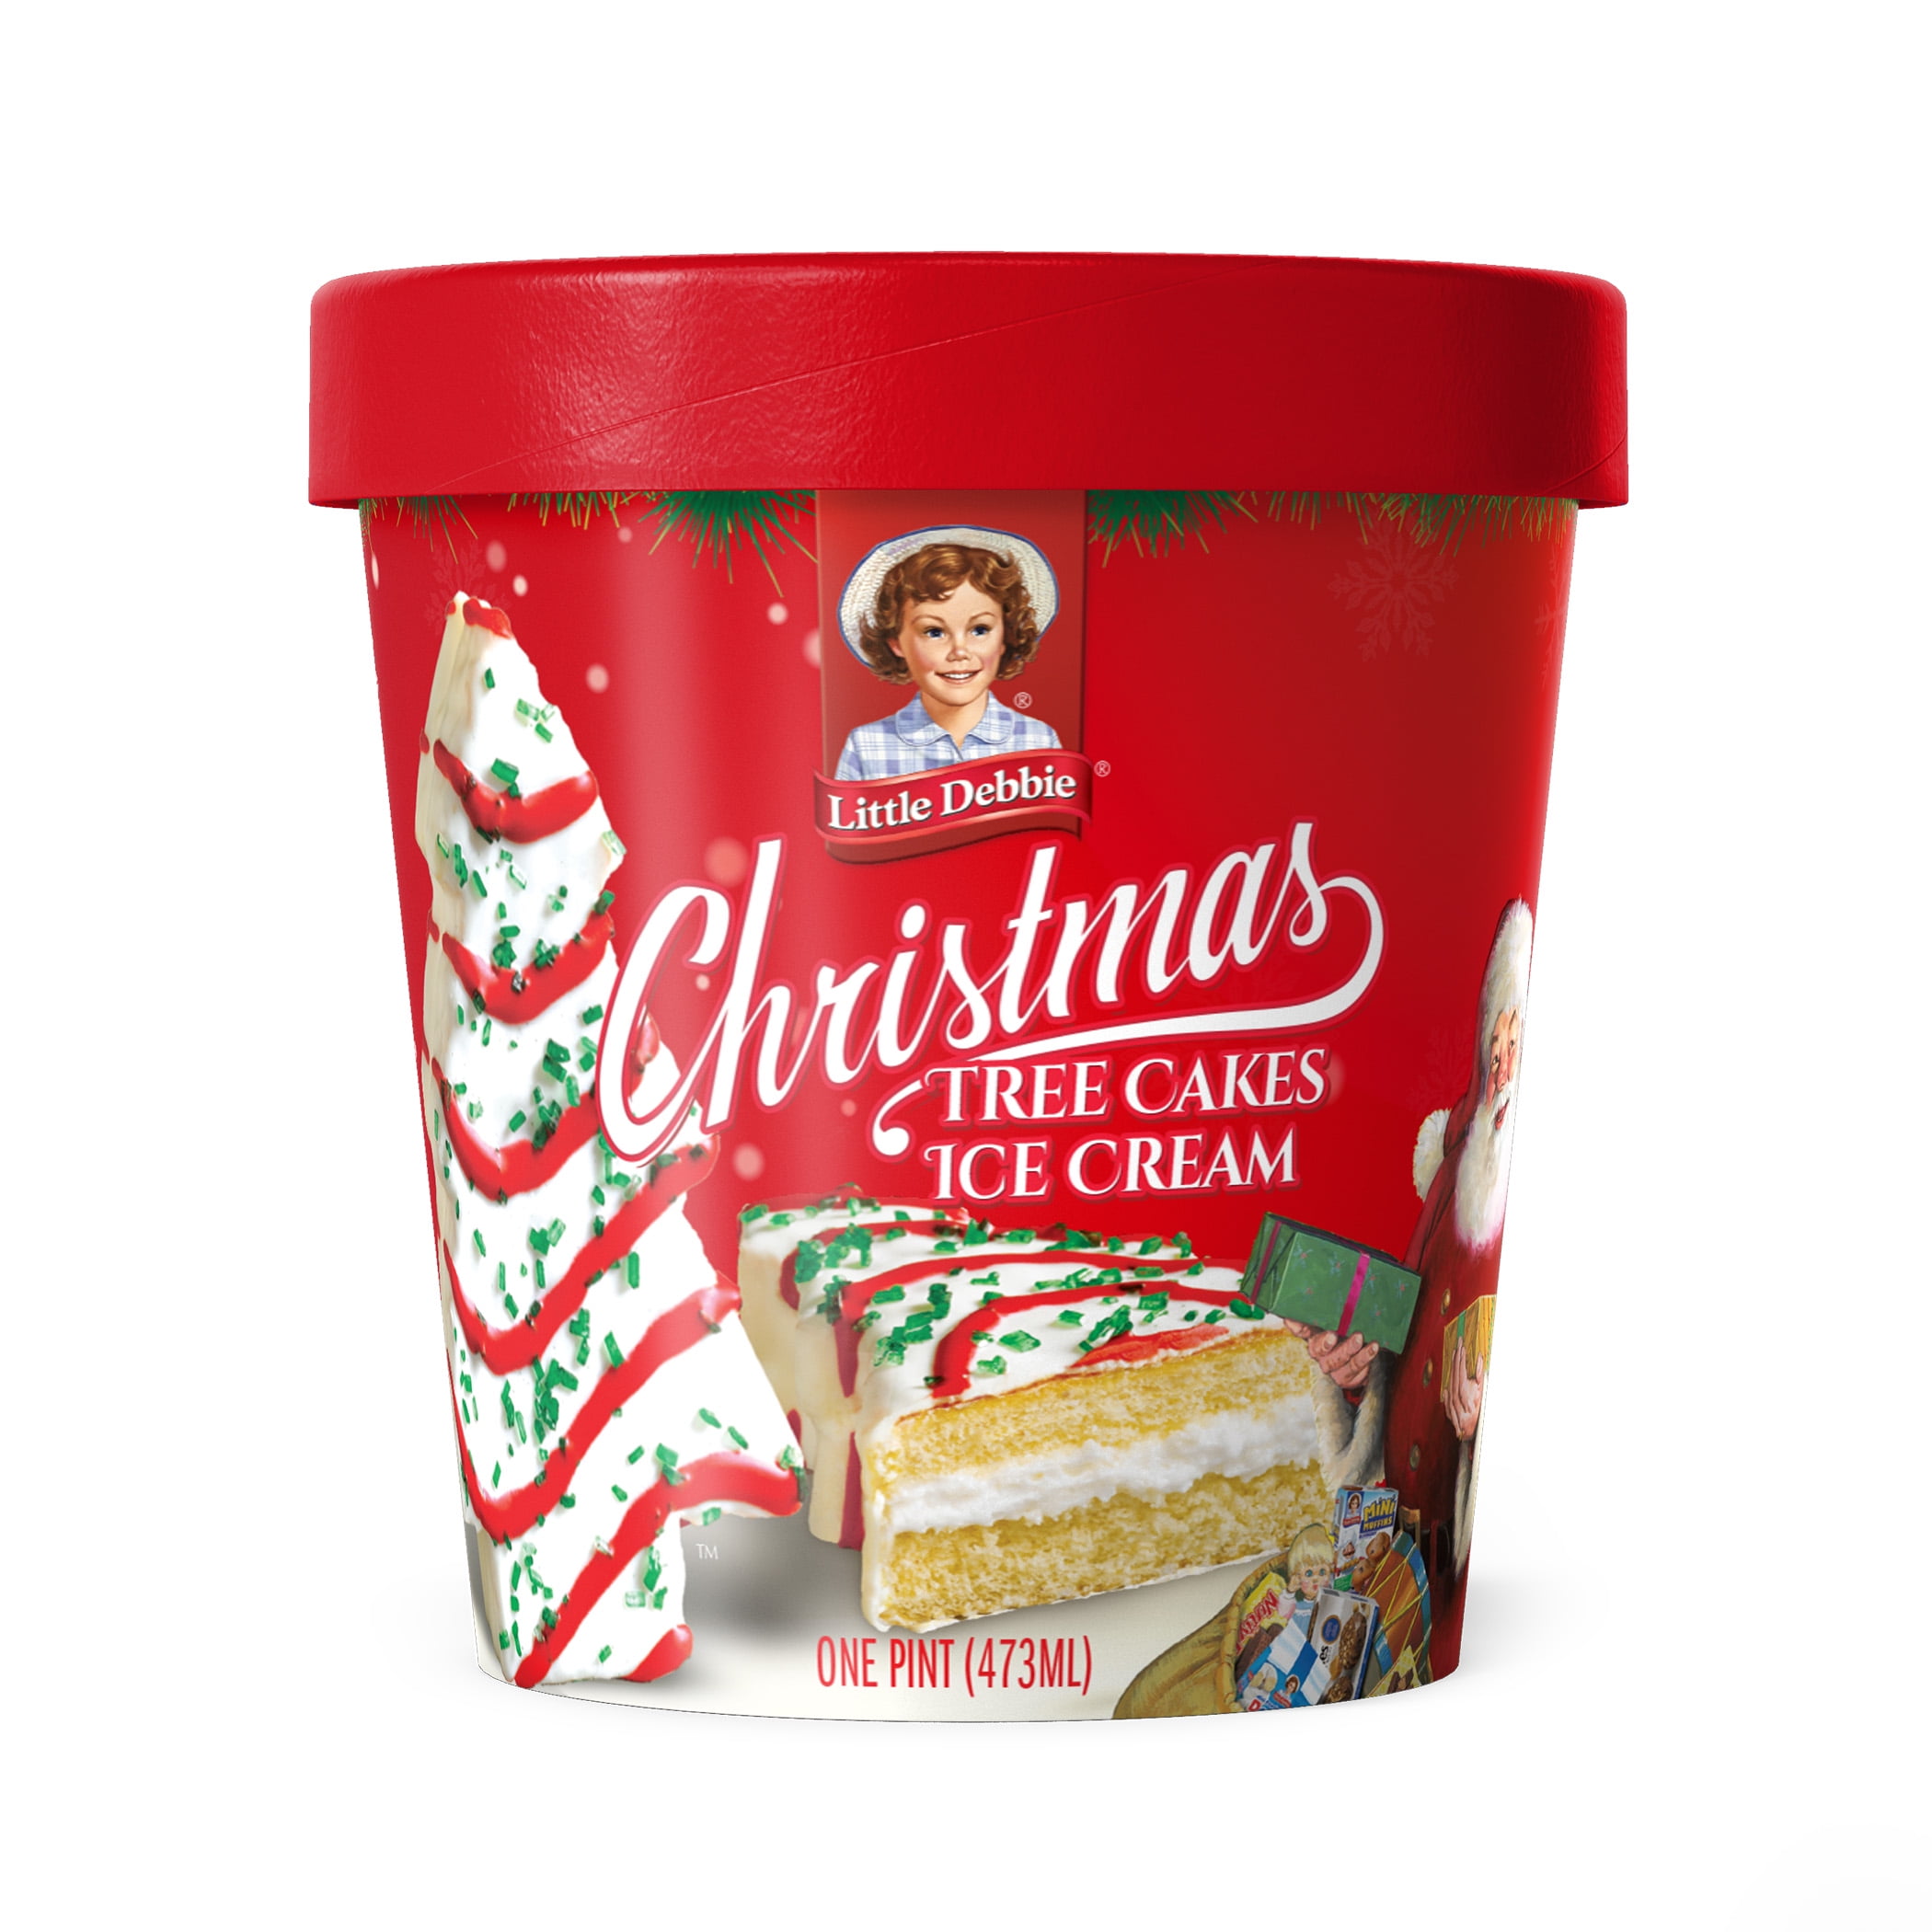 Little Debbie Christmas Tree Cake Ice Cream, Vanilla Ice Cream with Cake Chunks, Green Sprinkles and Red Icing